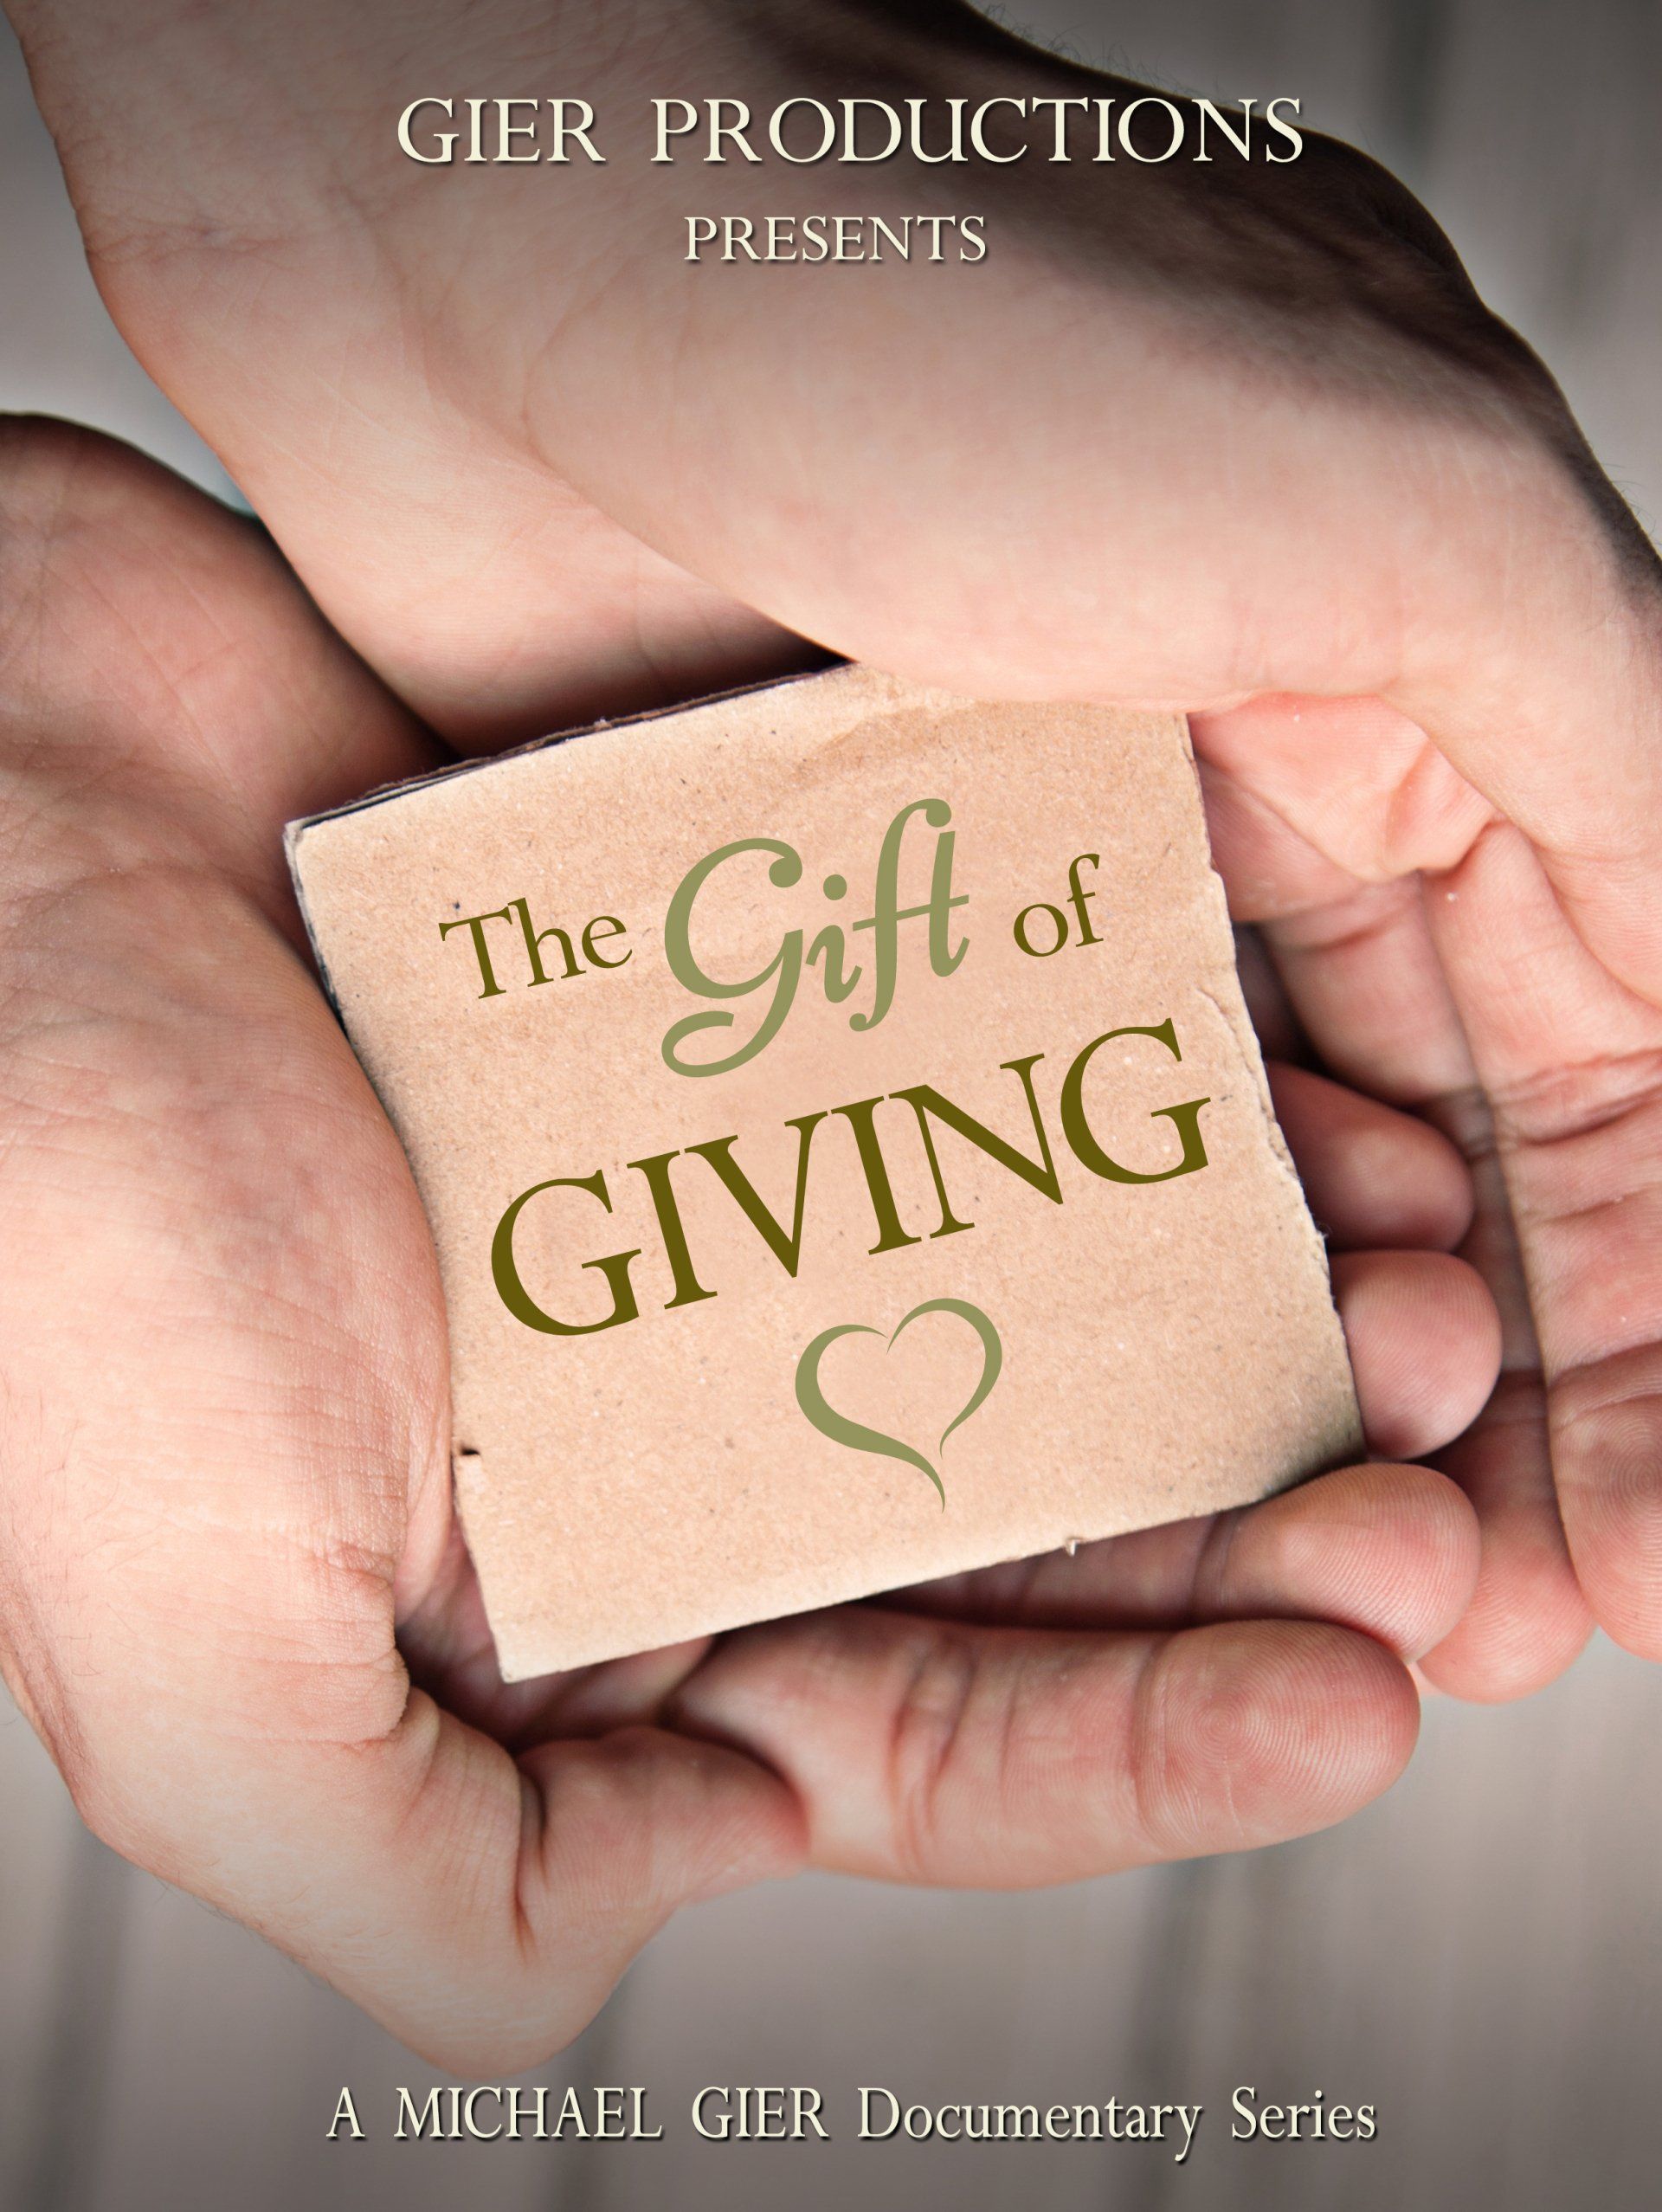 The gift of giving text written on cardboard in someone hands